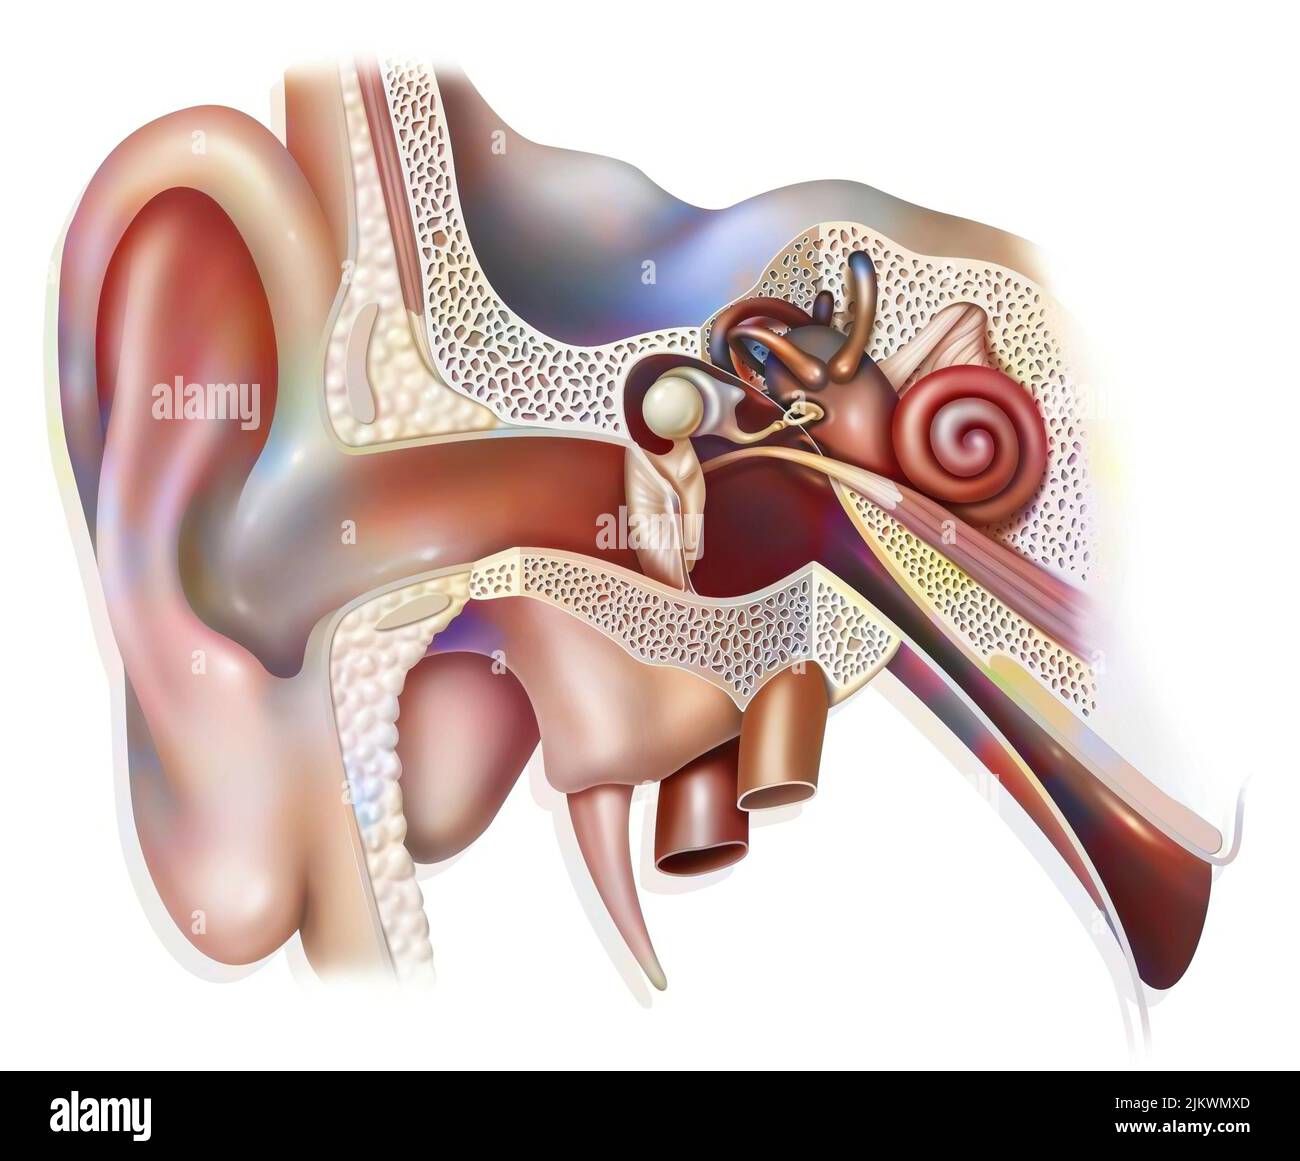 Anatomy of the inner ear showing the eardrum, the cochlea. Stock Photo